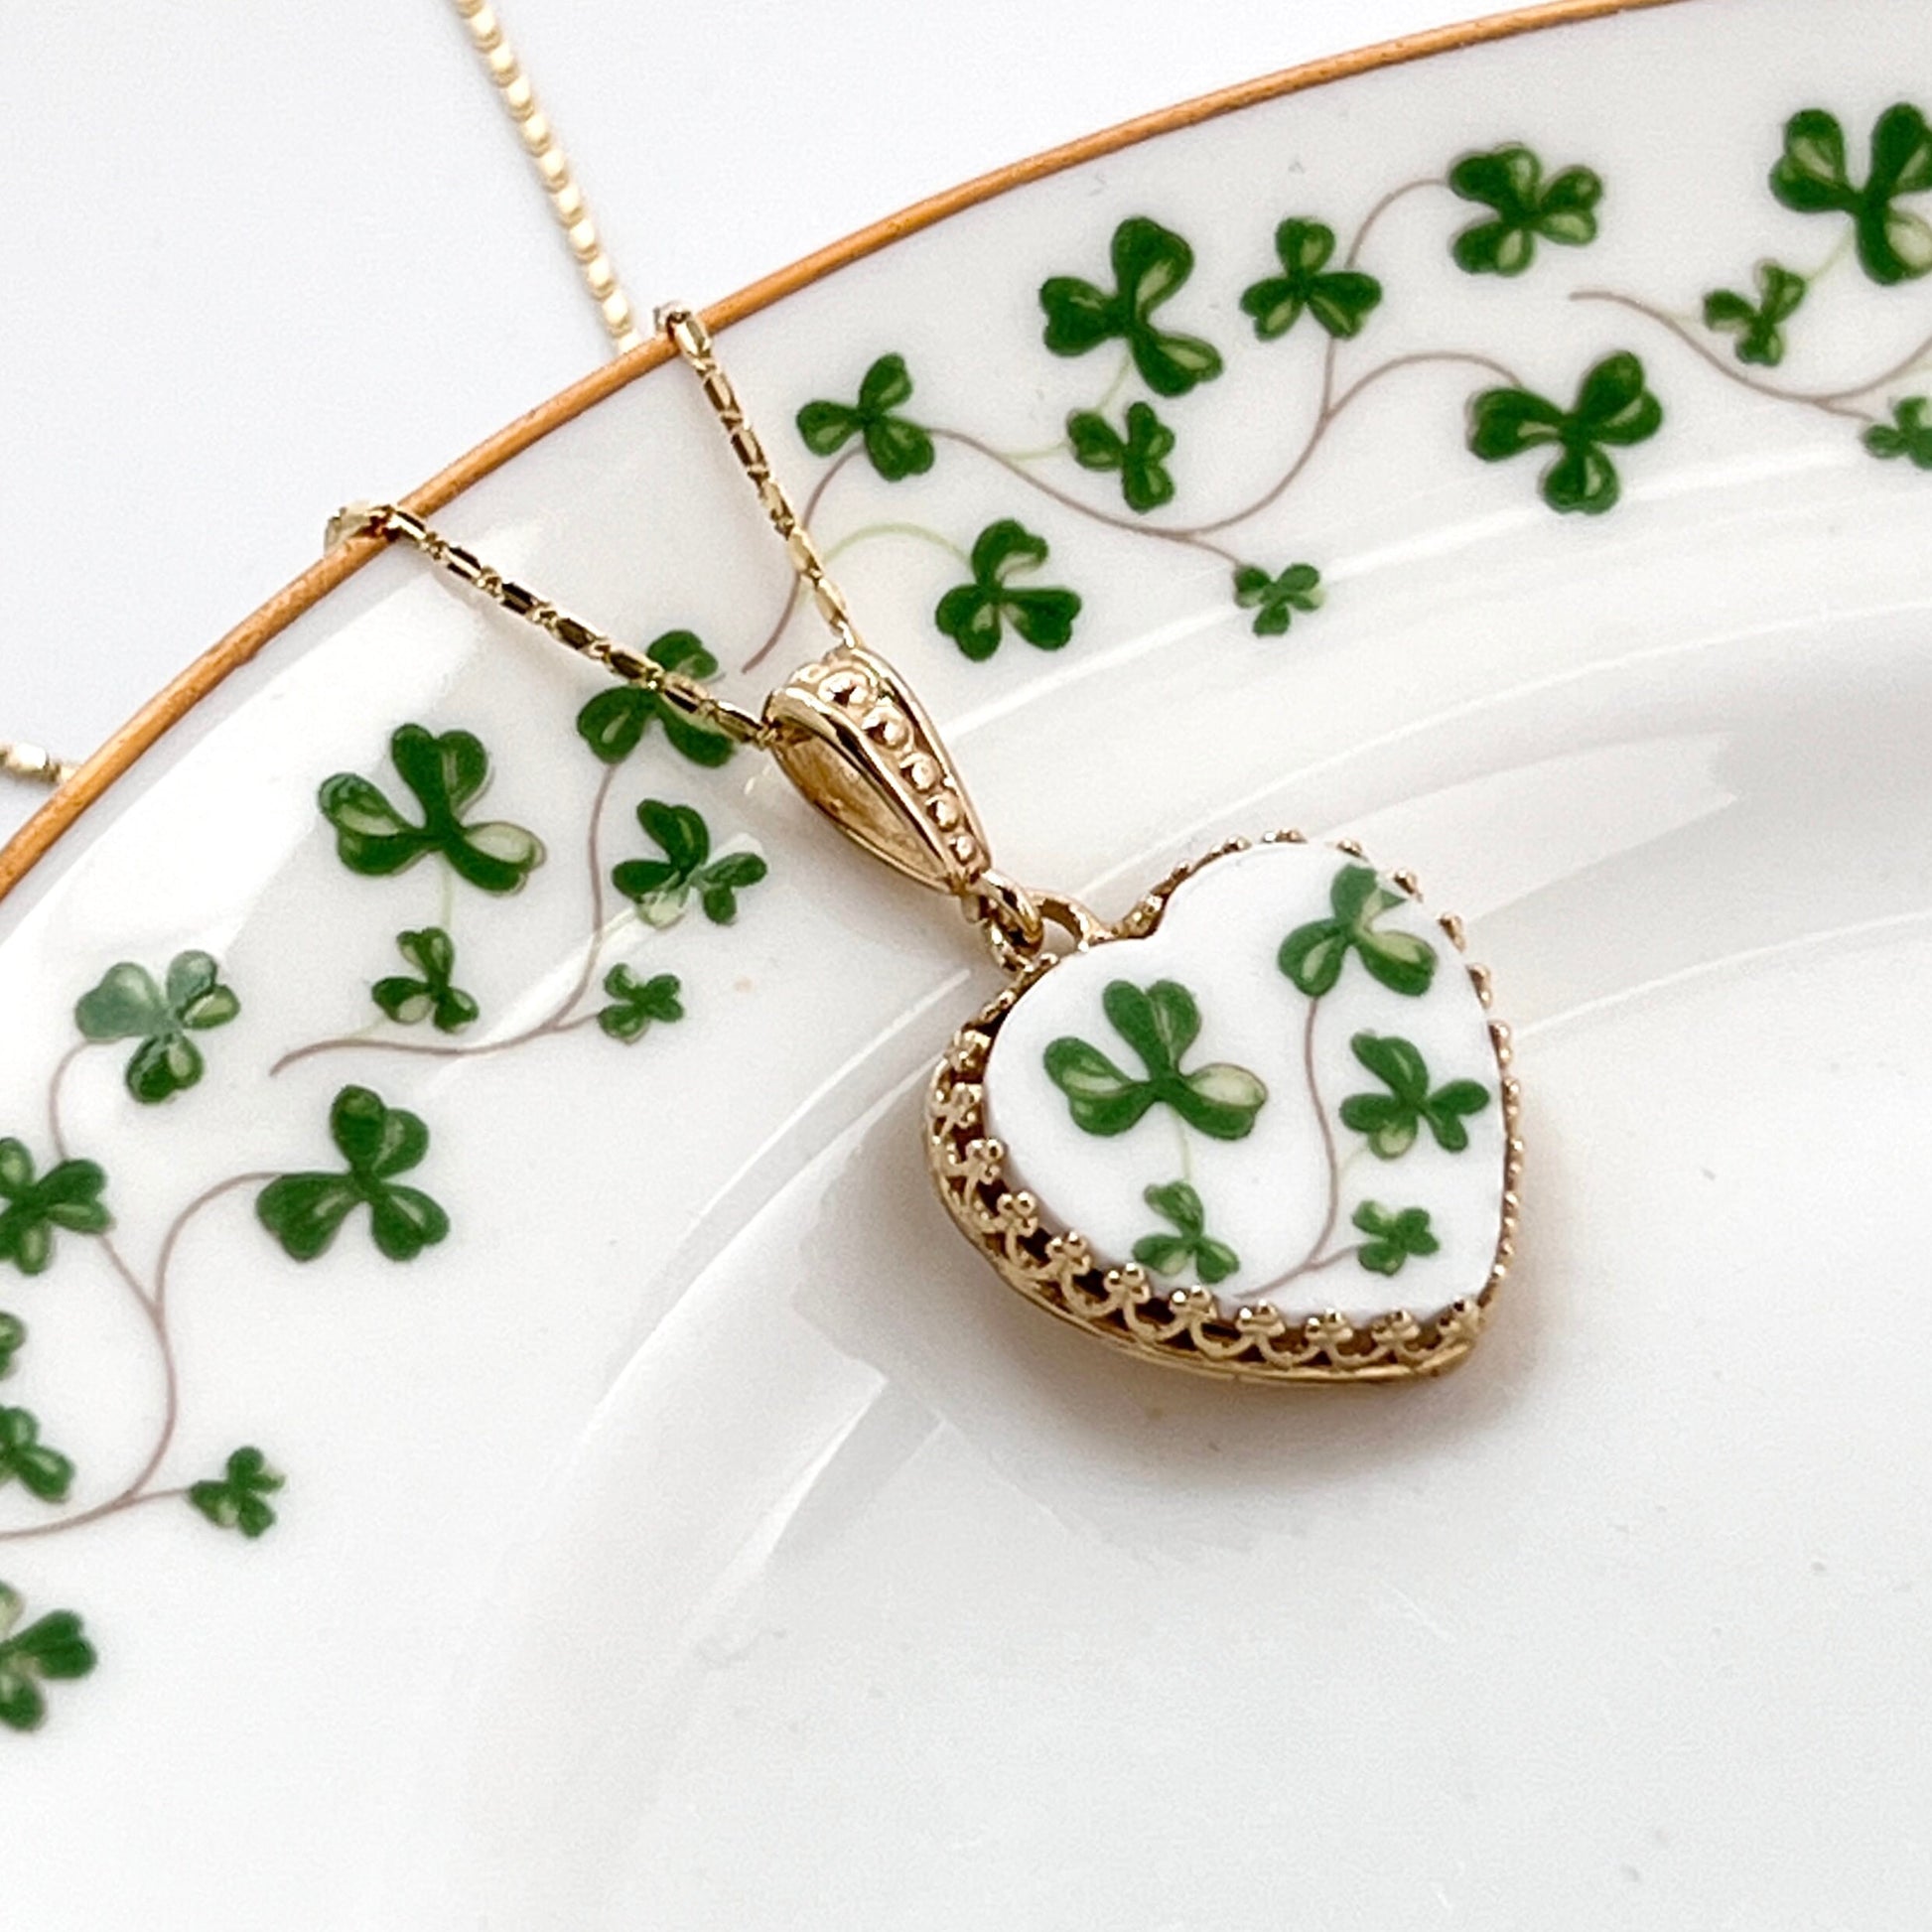 Adjustable 14k Gold Celtic Heart Necklace, Broken China Jewelry, Unique Irish 20th Anniversary Gift for Women, Royal Tara China Necklace